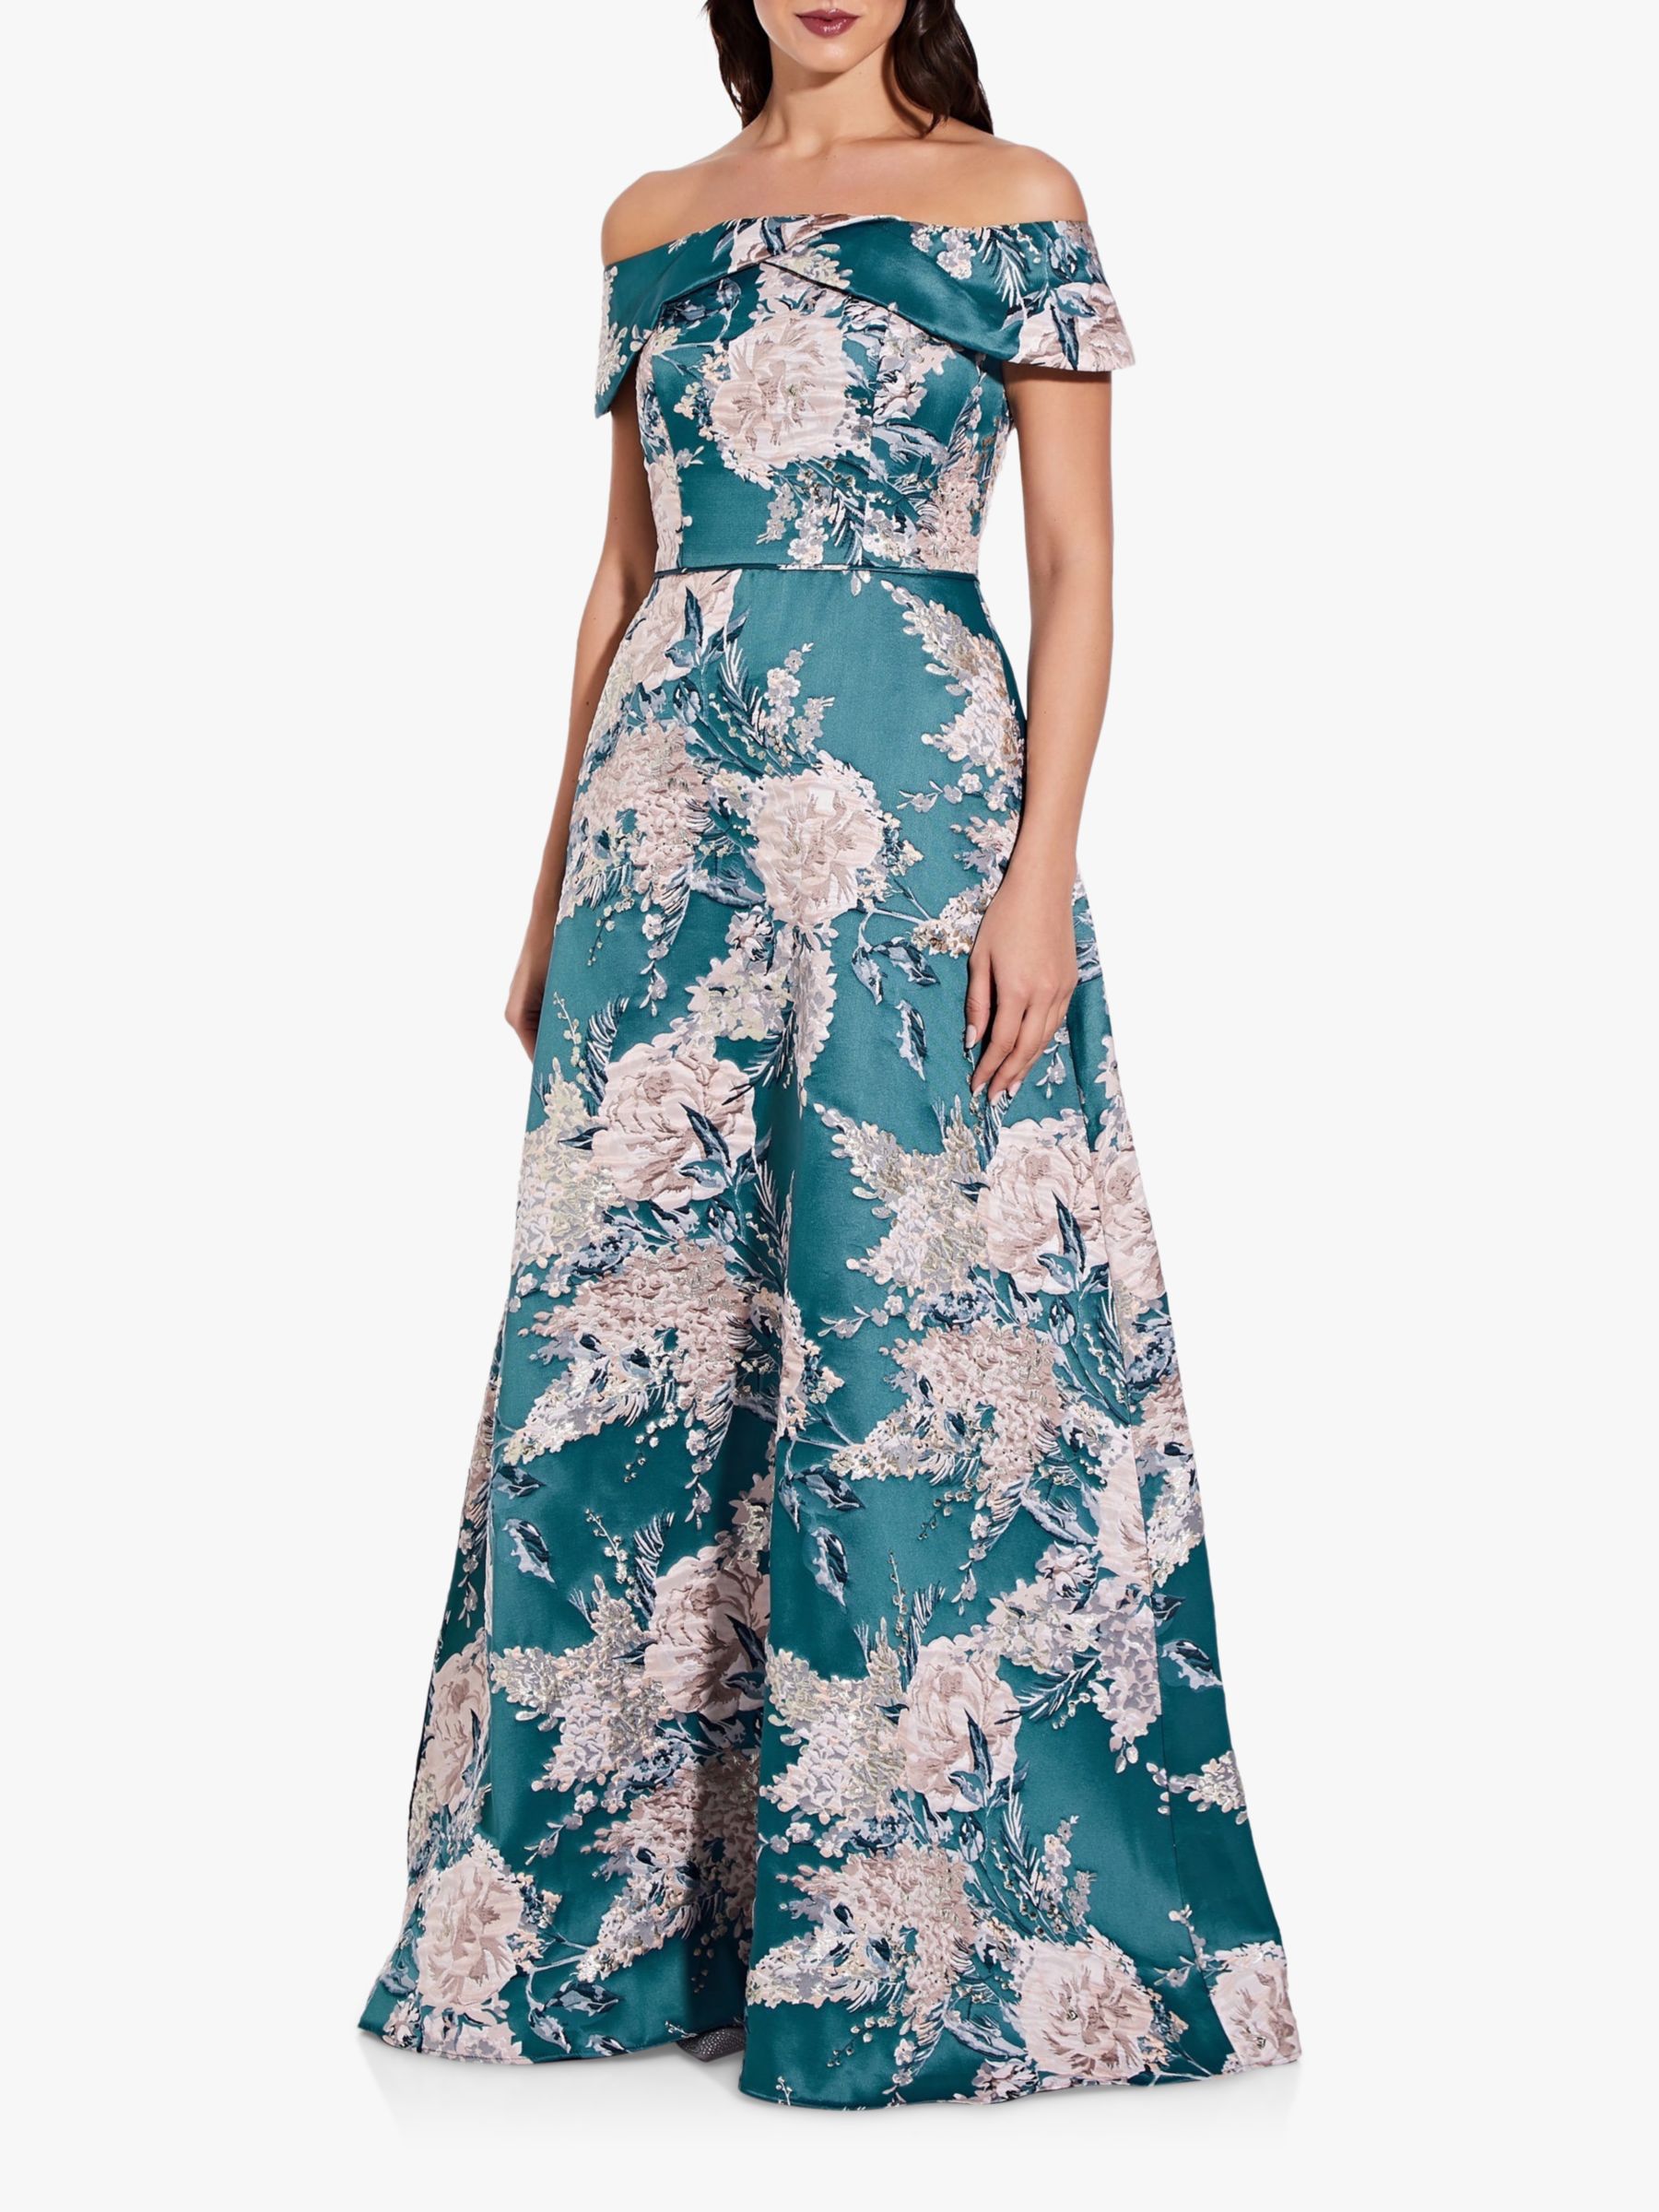 Adrianna Papell Off Shoulder Floral ...